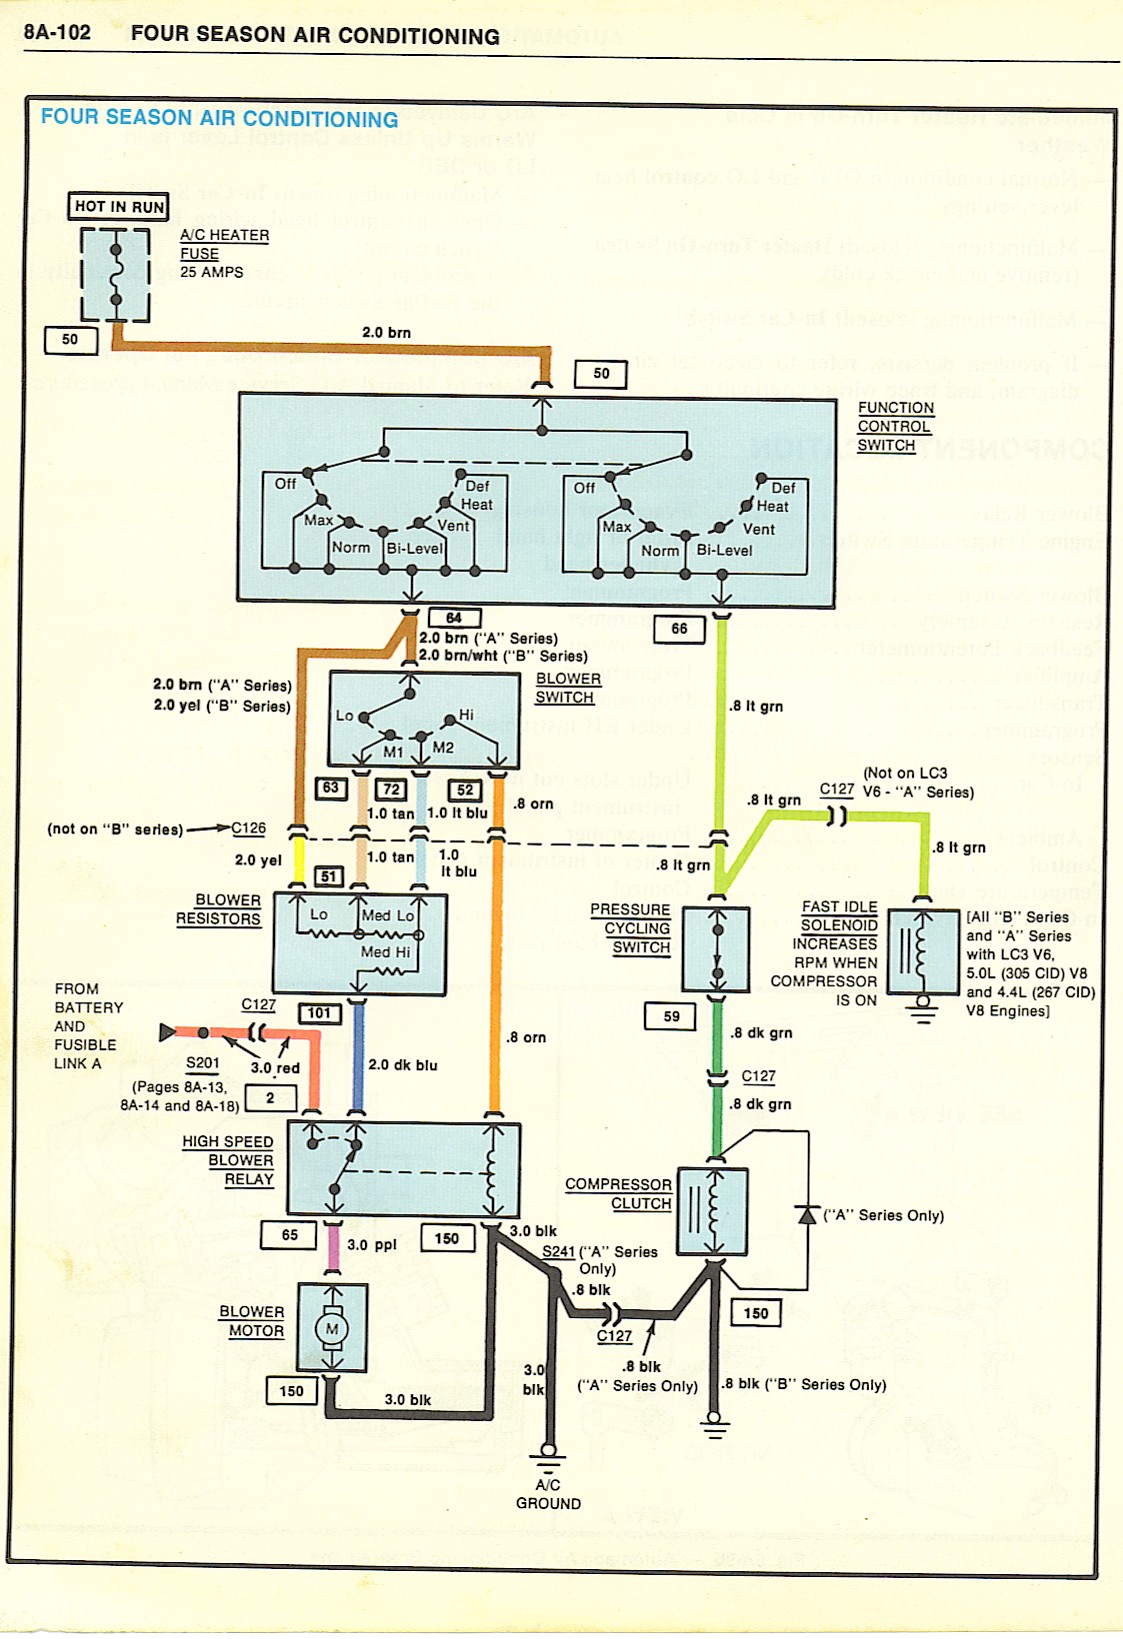 Central Air Conditioner Thermostat Wiring Diagram from www.maliburacing.com